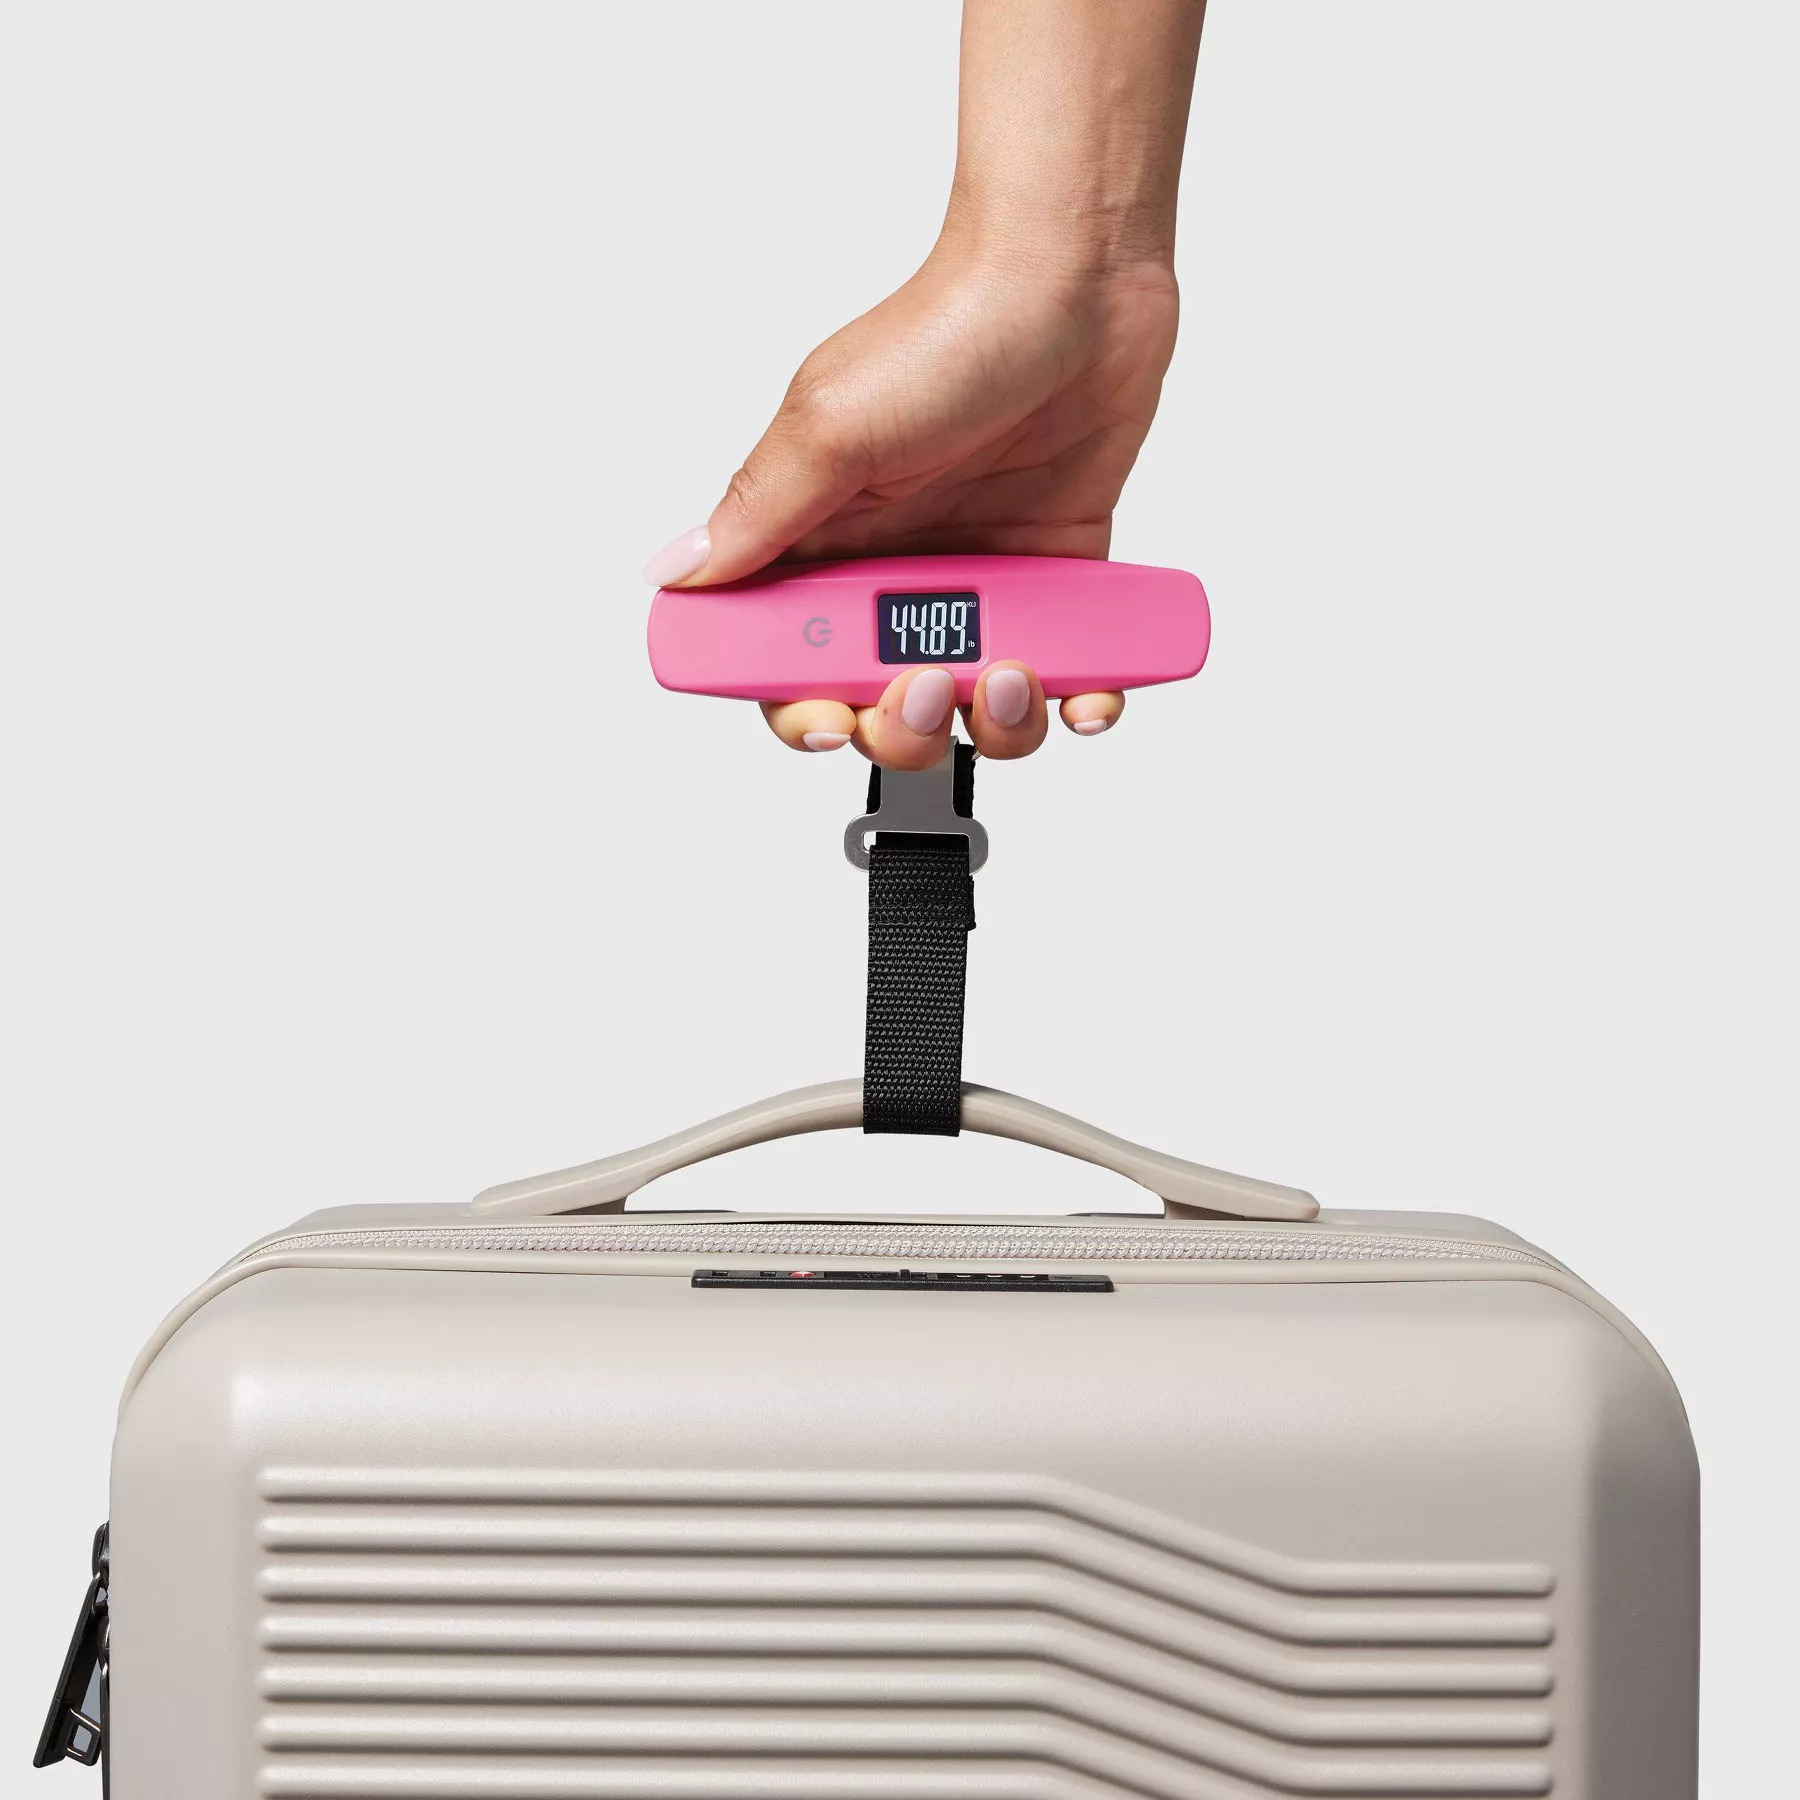 Hand holding a digital luggage scale with a reading, attached to a suitcase handle for weight measurement